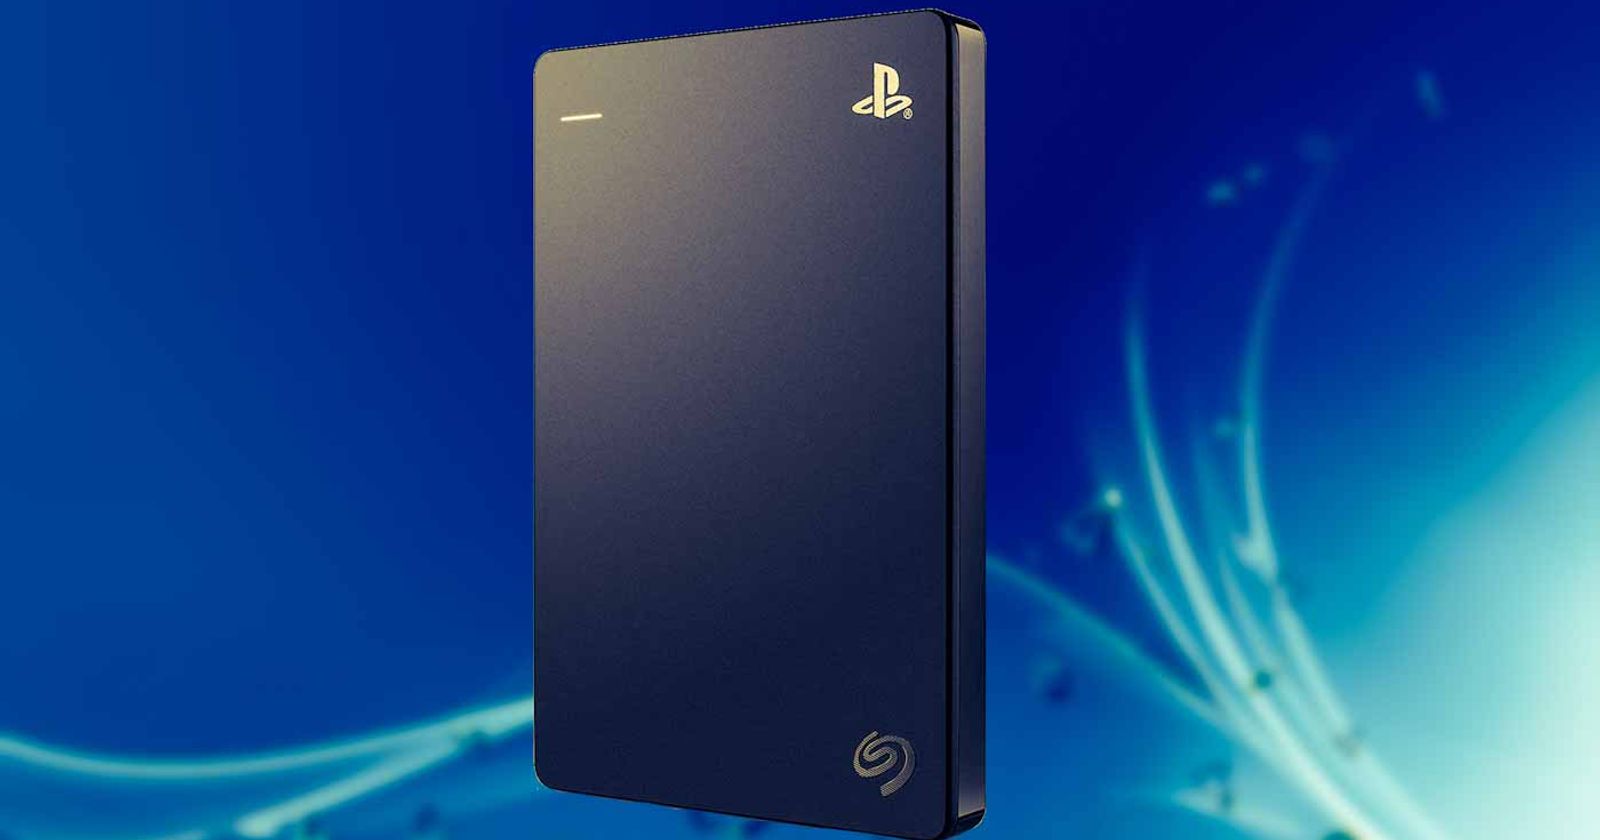 How To Fix A Corrupted External Hard Drive PS4